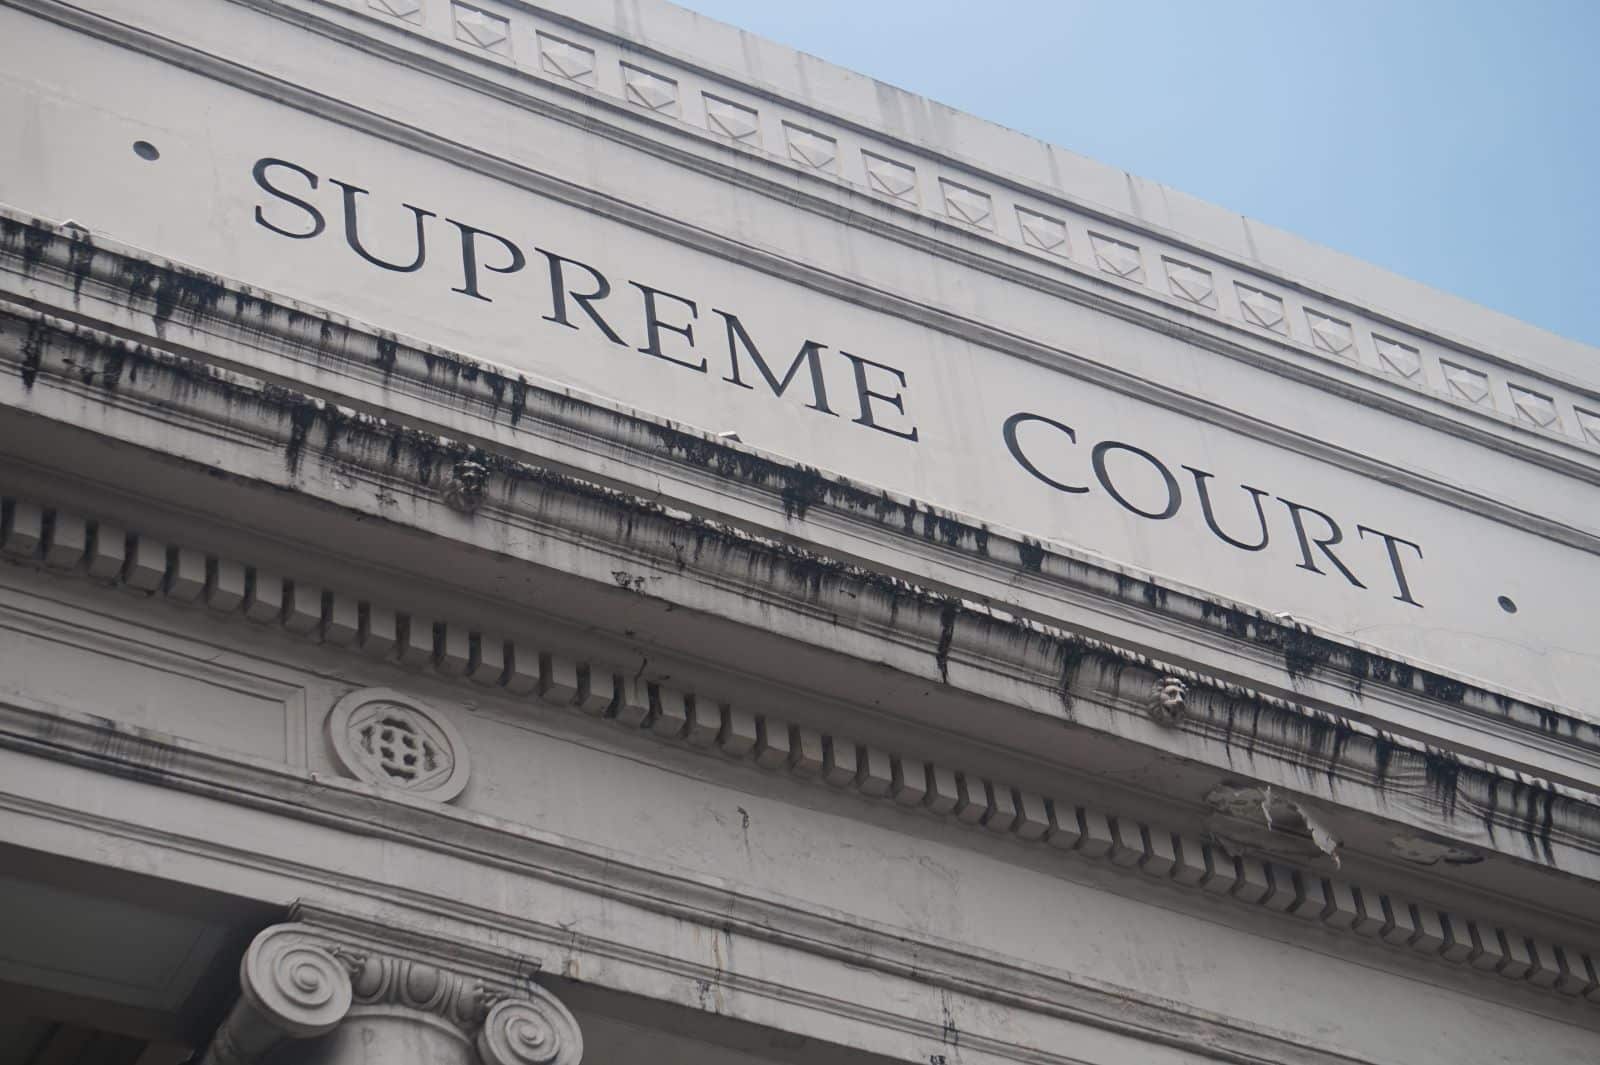 Image Credit: Shutterstock / lito_lakwatsero <p><span>The U.S. Supreme Court has played a crucial role in defining and refining affirmative action policies, particularly regarding their use in college admissions and employment.</span></p>